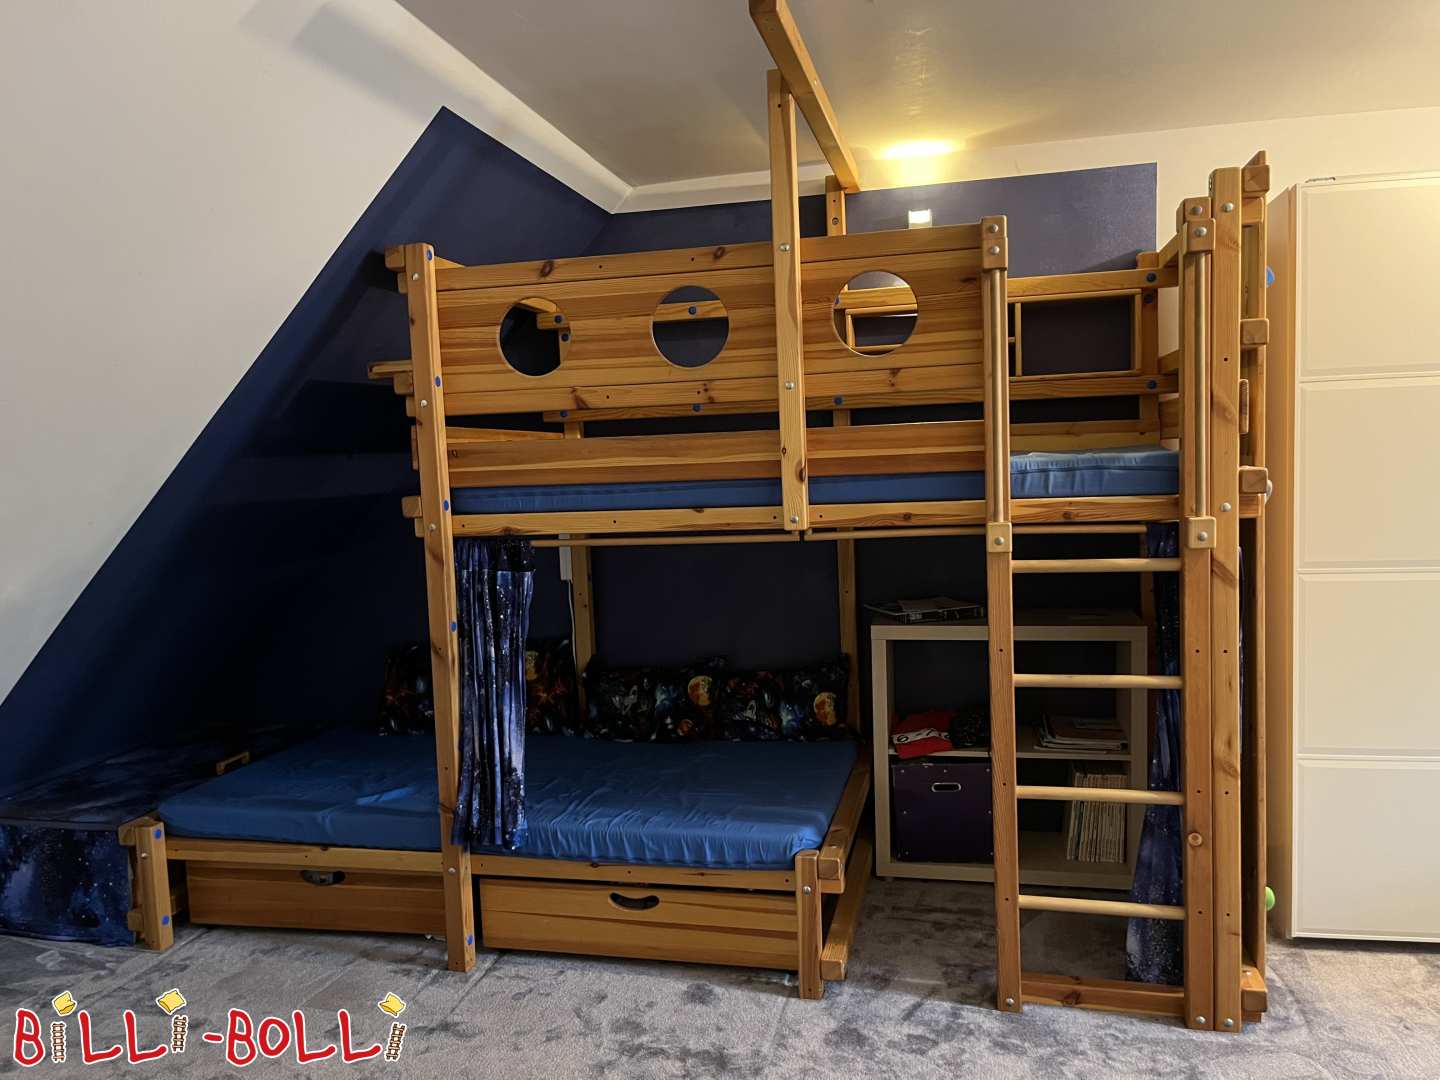 Bunk bed-side-offset plus climbing wall (Category: Bunk Bed Laterally Staggered pre-owned)